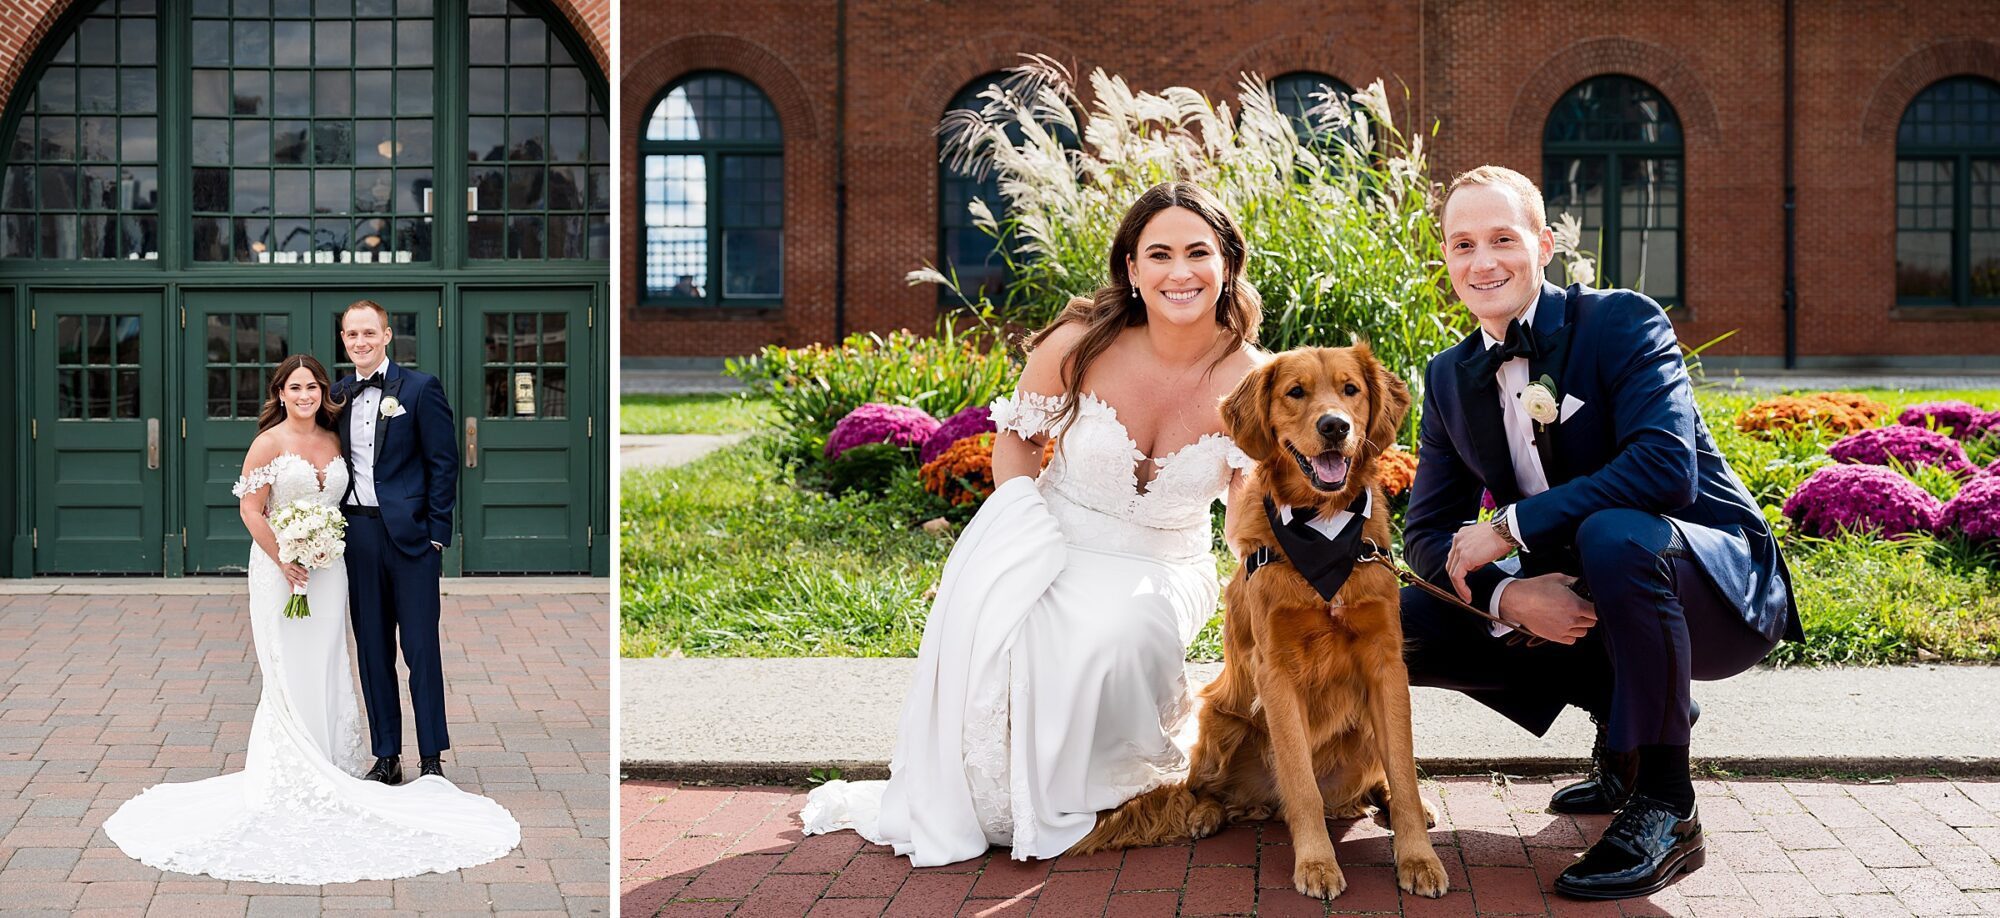 A bride and groom pose with their dog in front of a brick building.